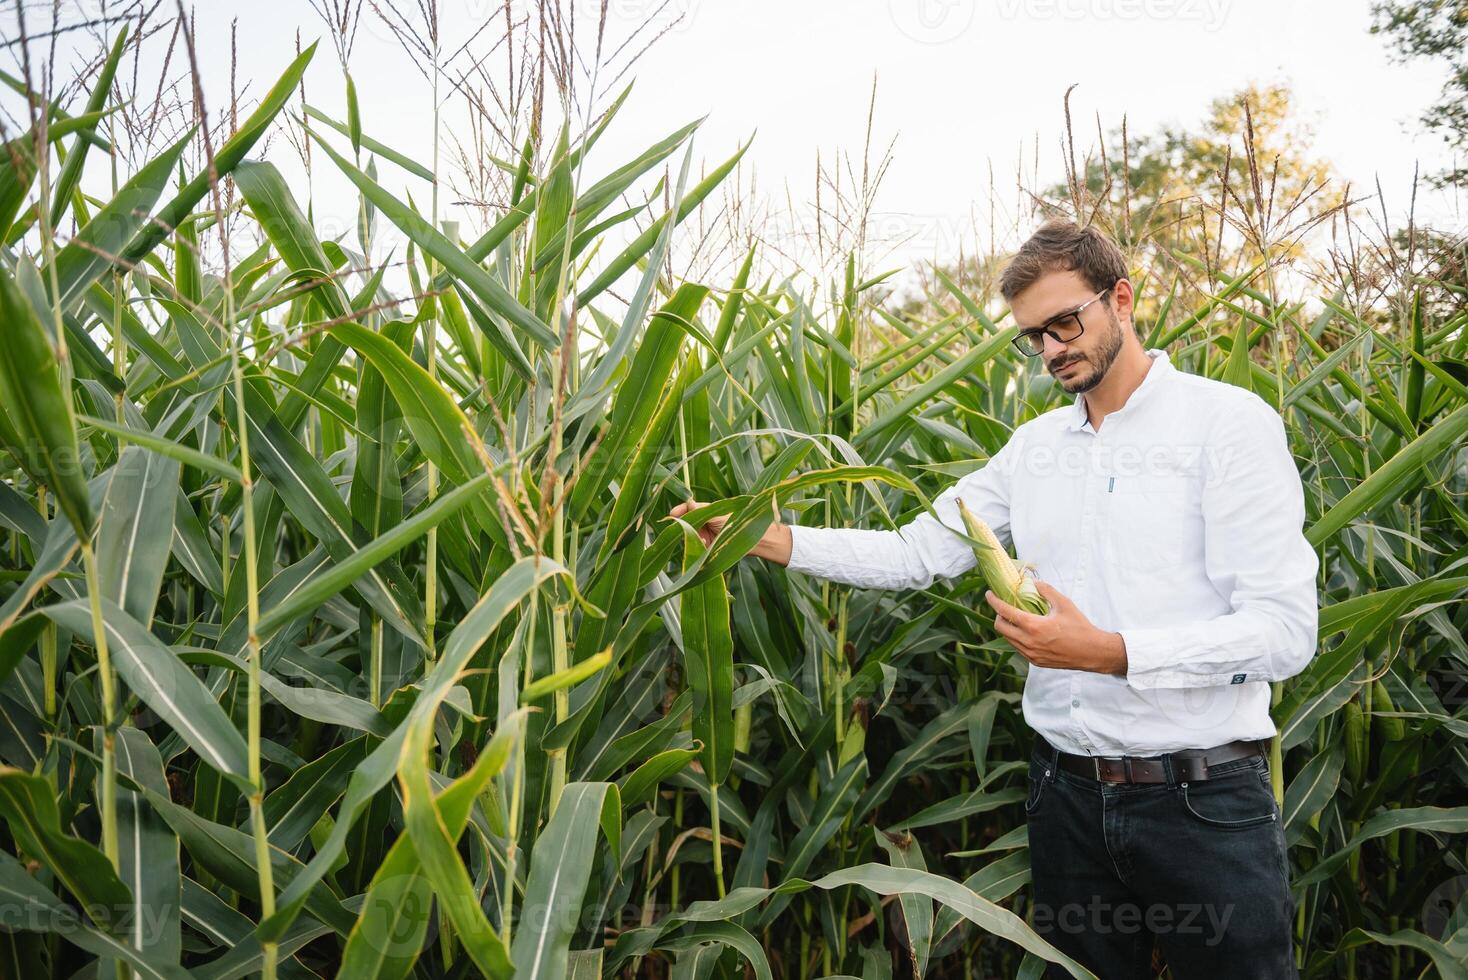 Happy farmer in the field checking corn plants during a sunny summer day, agriculture and food production concept photo